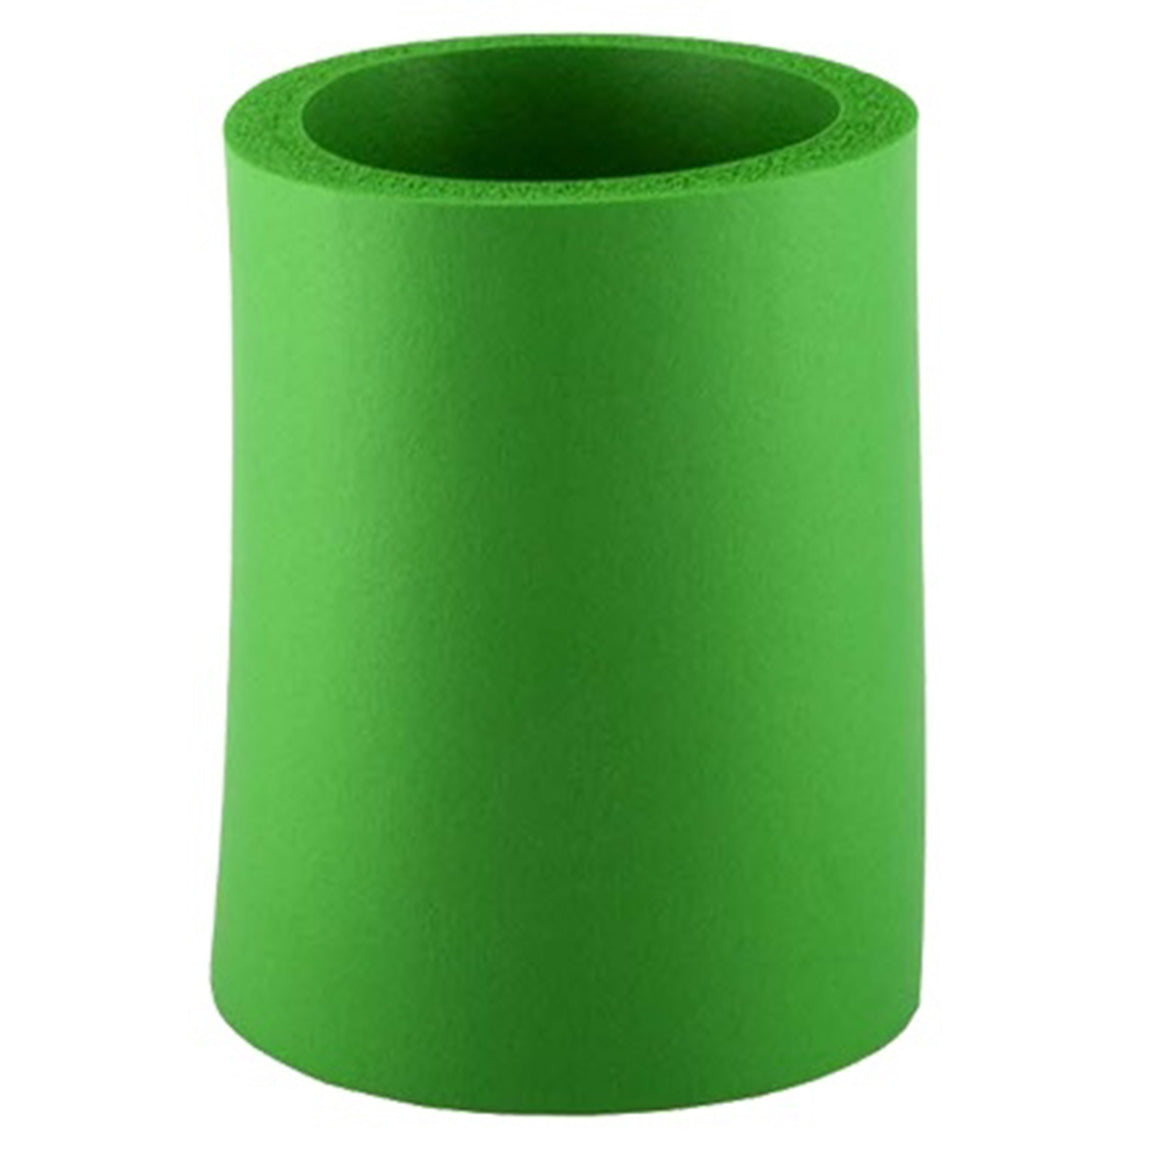 FoamZone Can Hugger with 3/8" Thick Foam